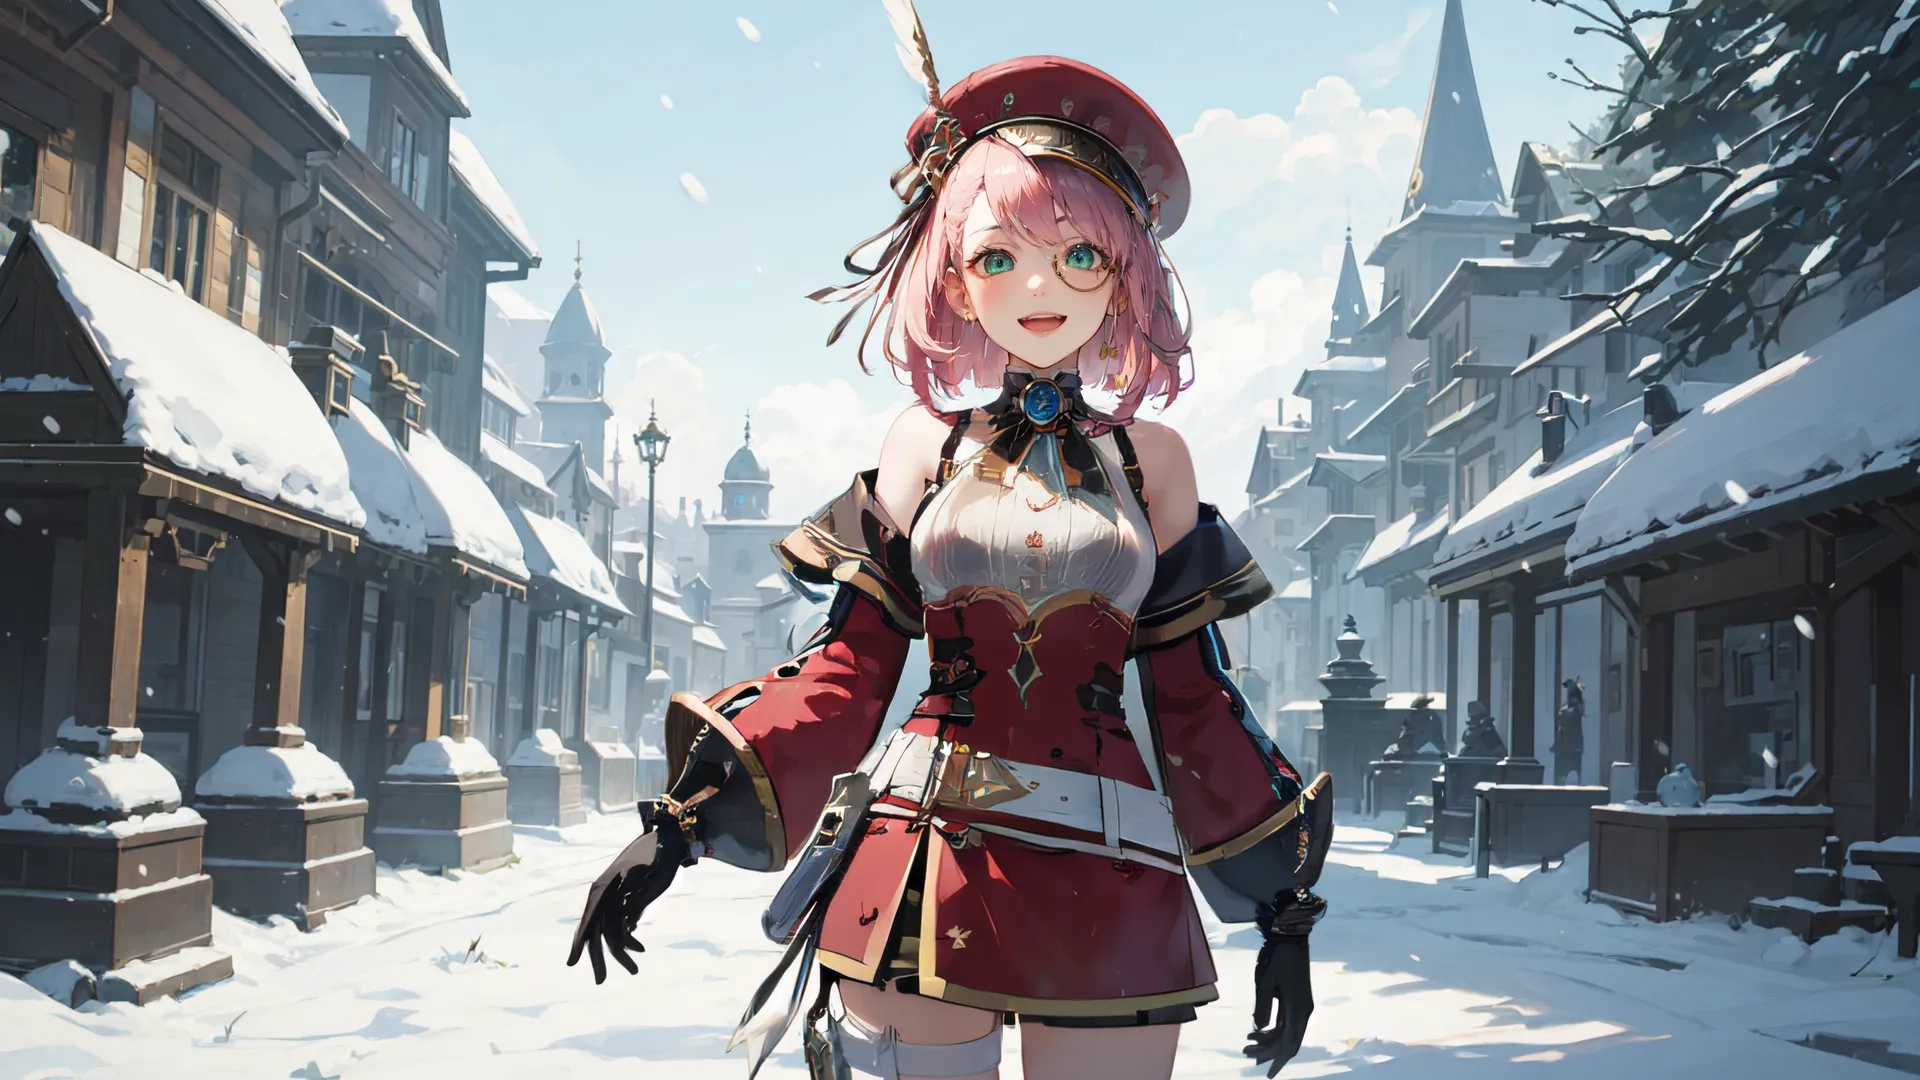 a woman is wearing pink hair and wearing an elaborate dress with a sword on the street in a residential area covered in snow and a town
